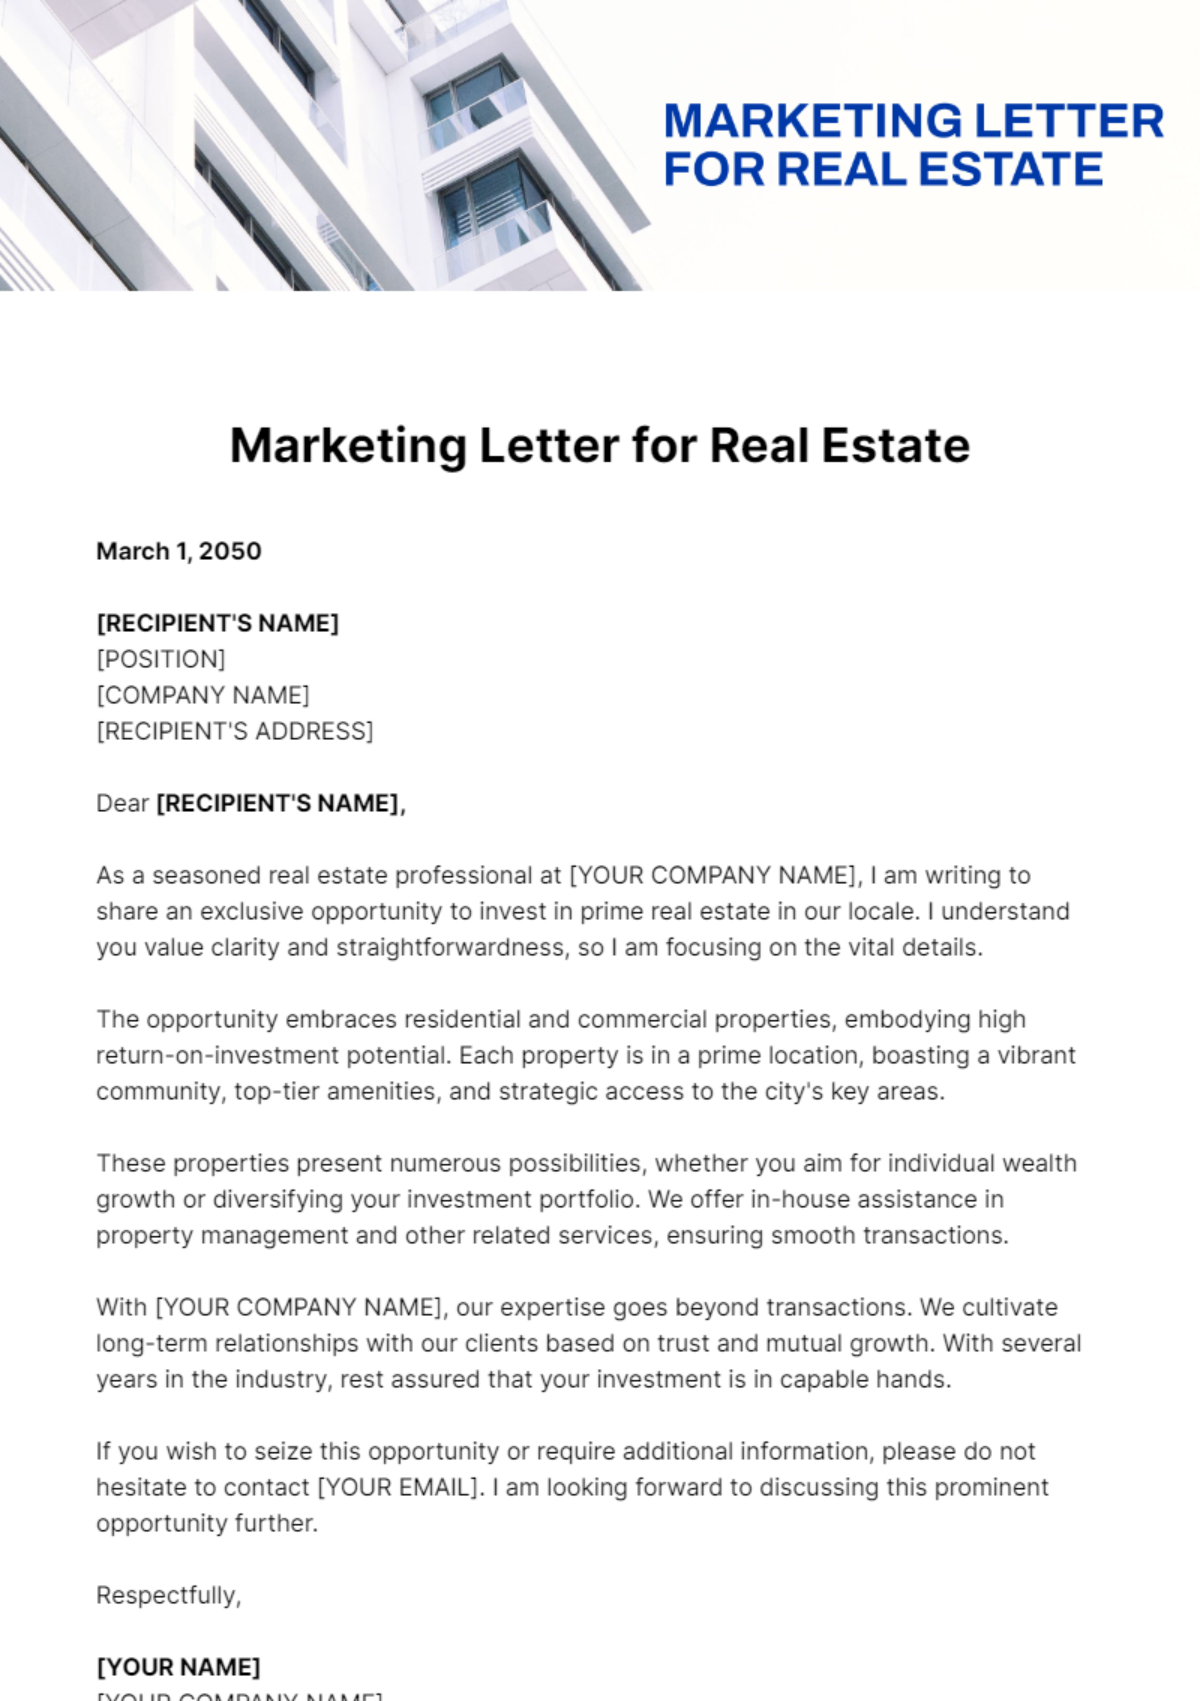 Free Marketing Letter for Real Estate Template